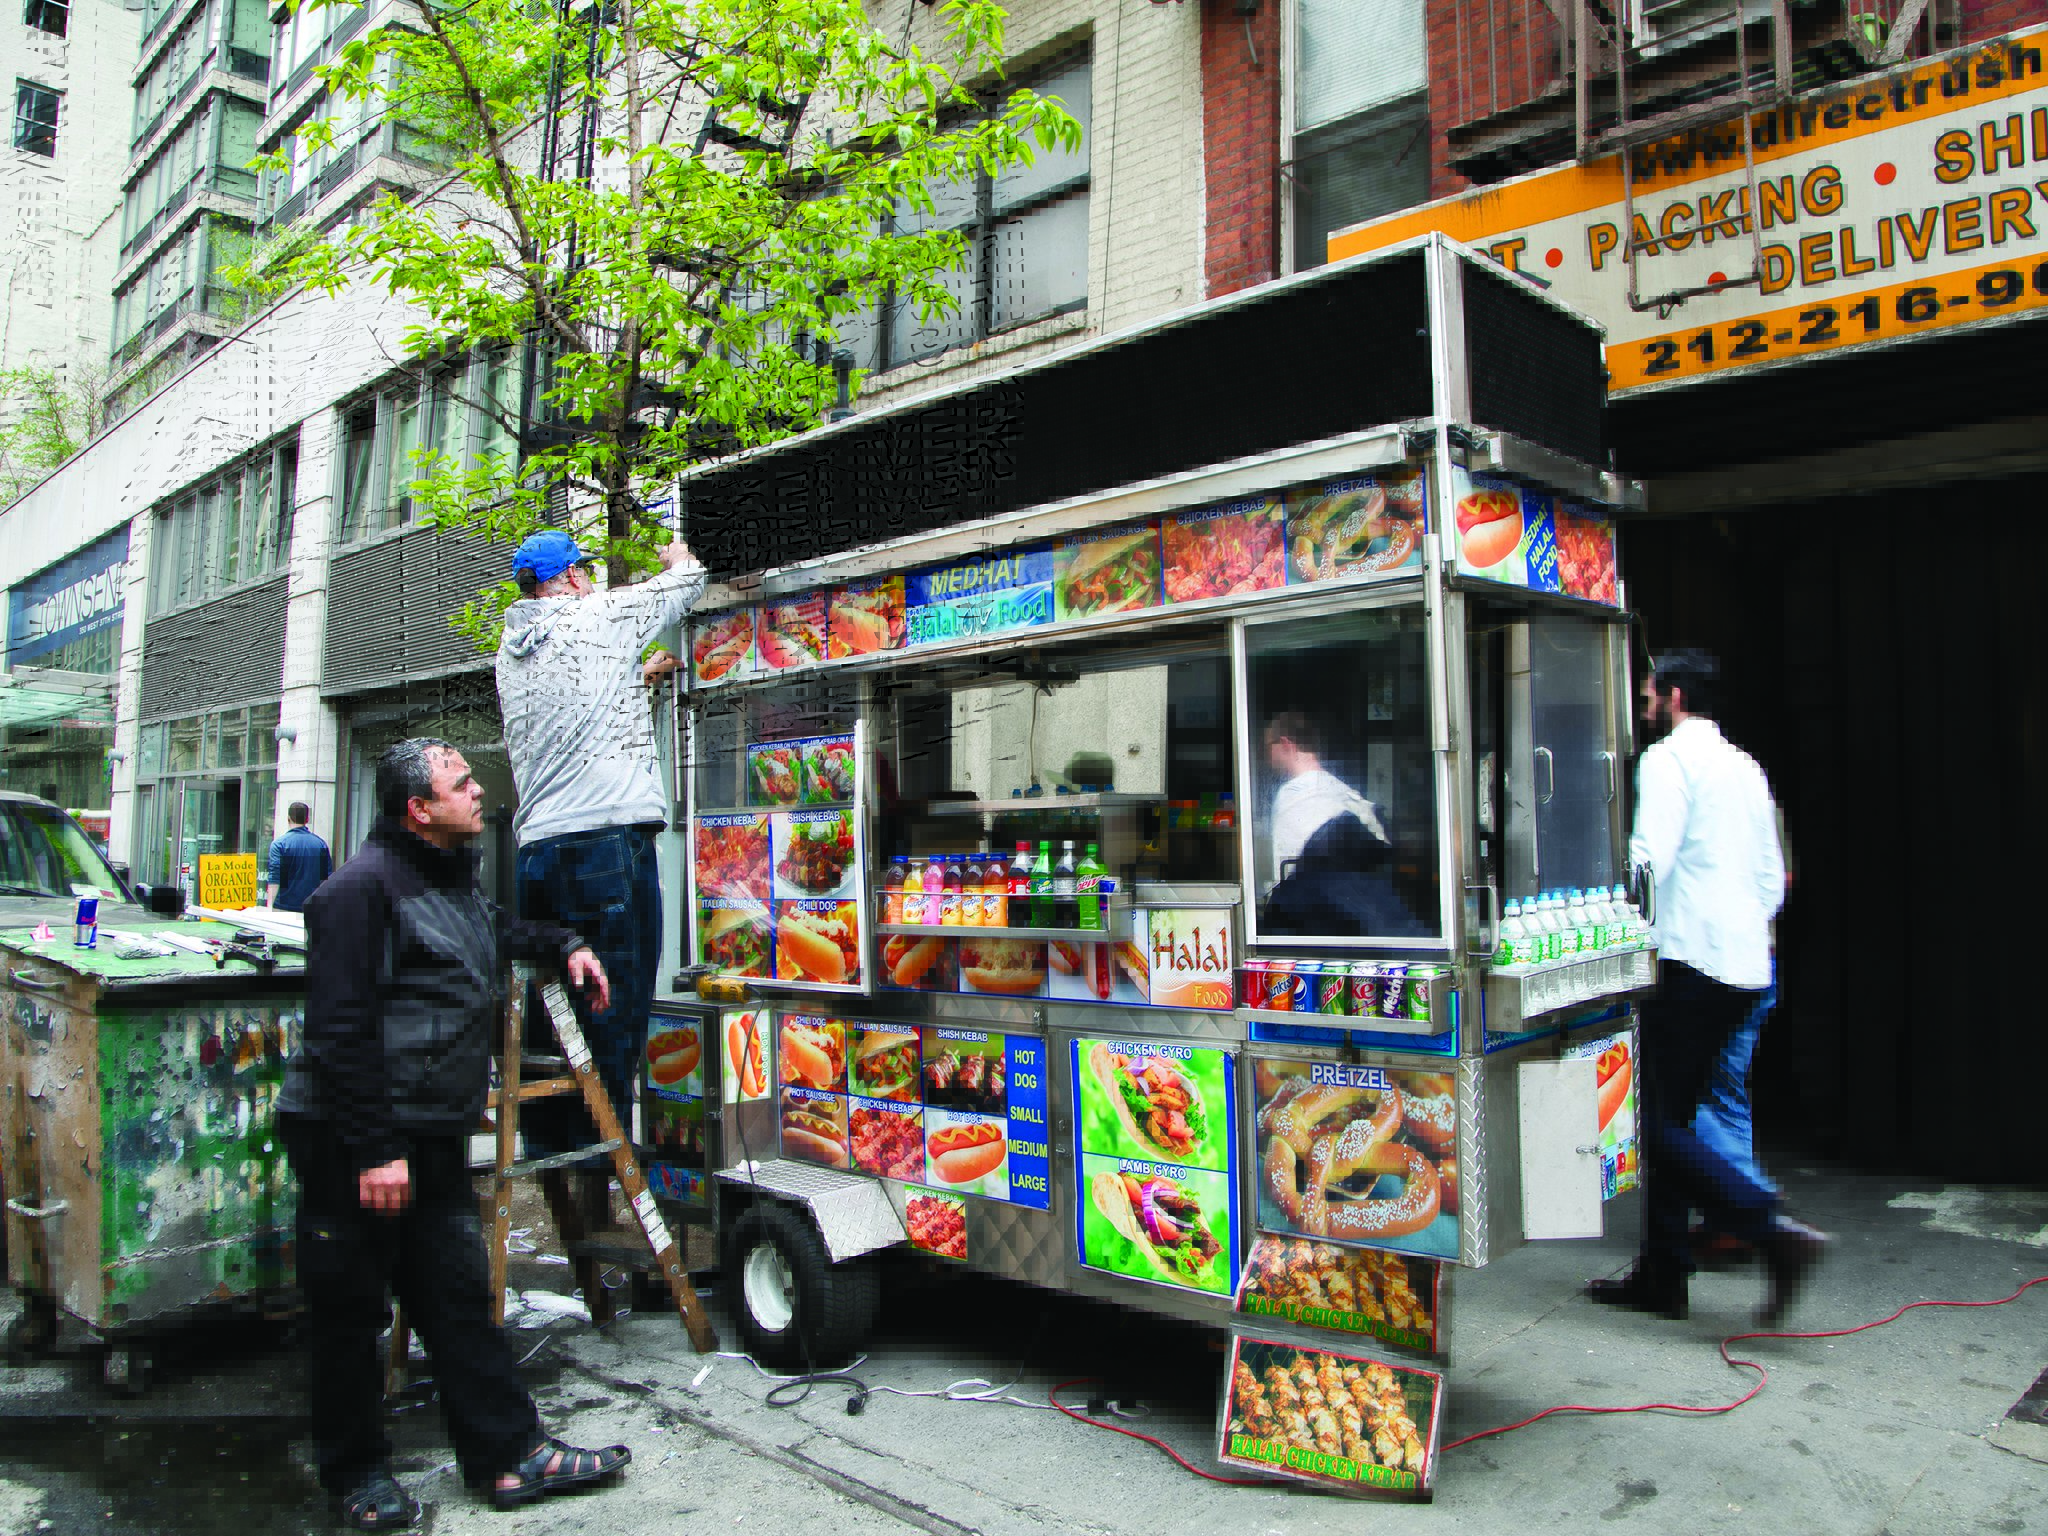 Hot Dog Vendors And Coffee Carts Turn To A Black Market Operating